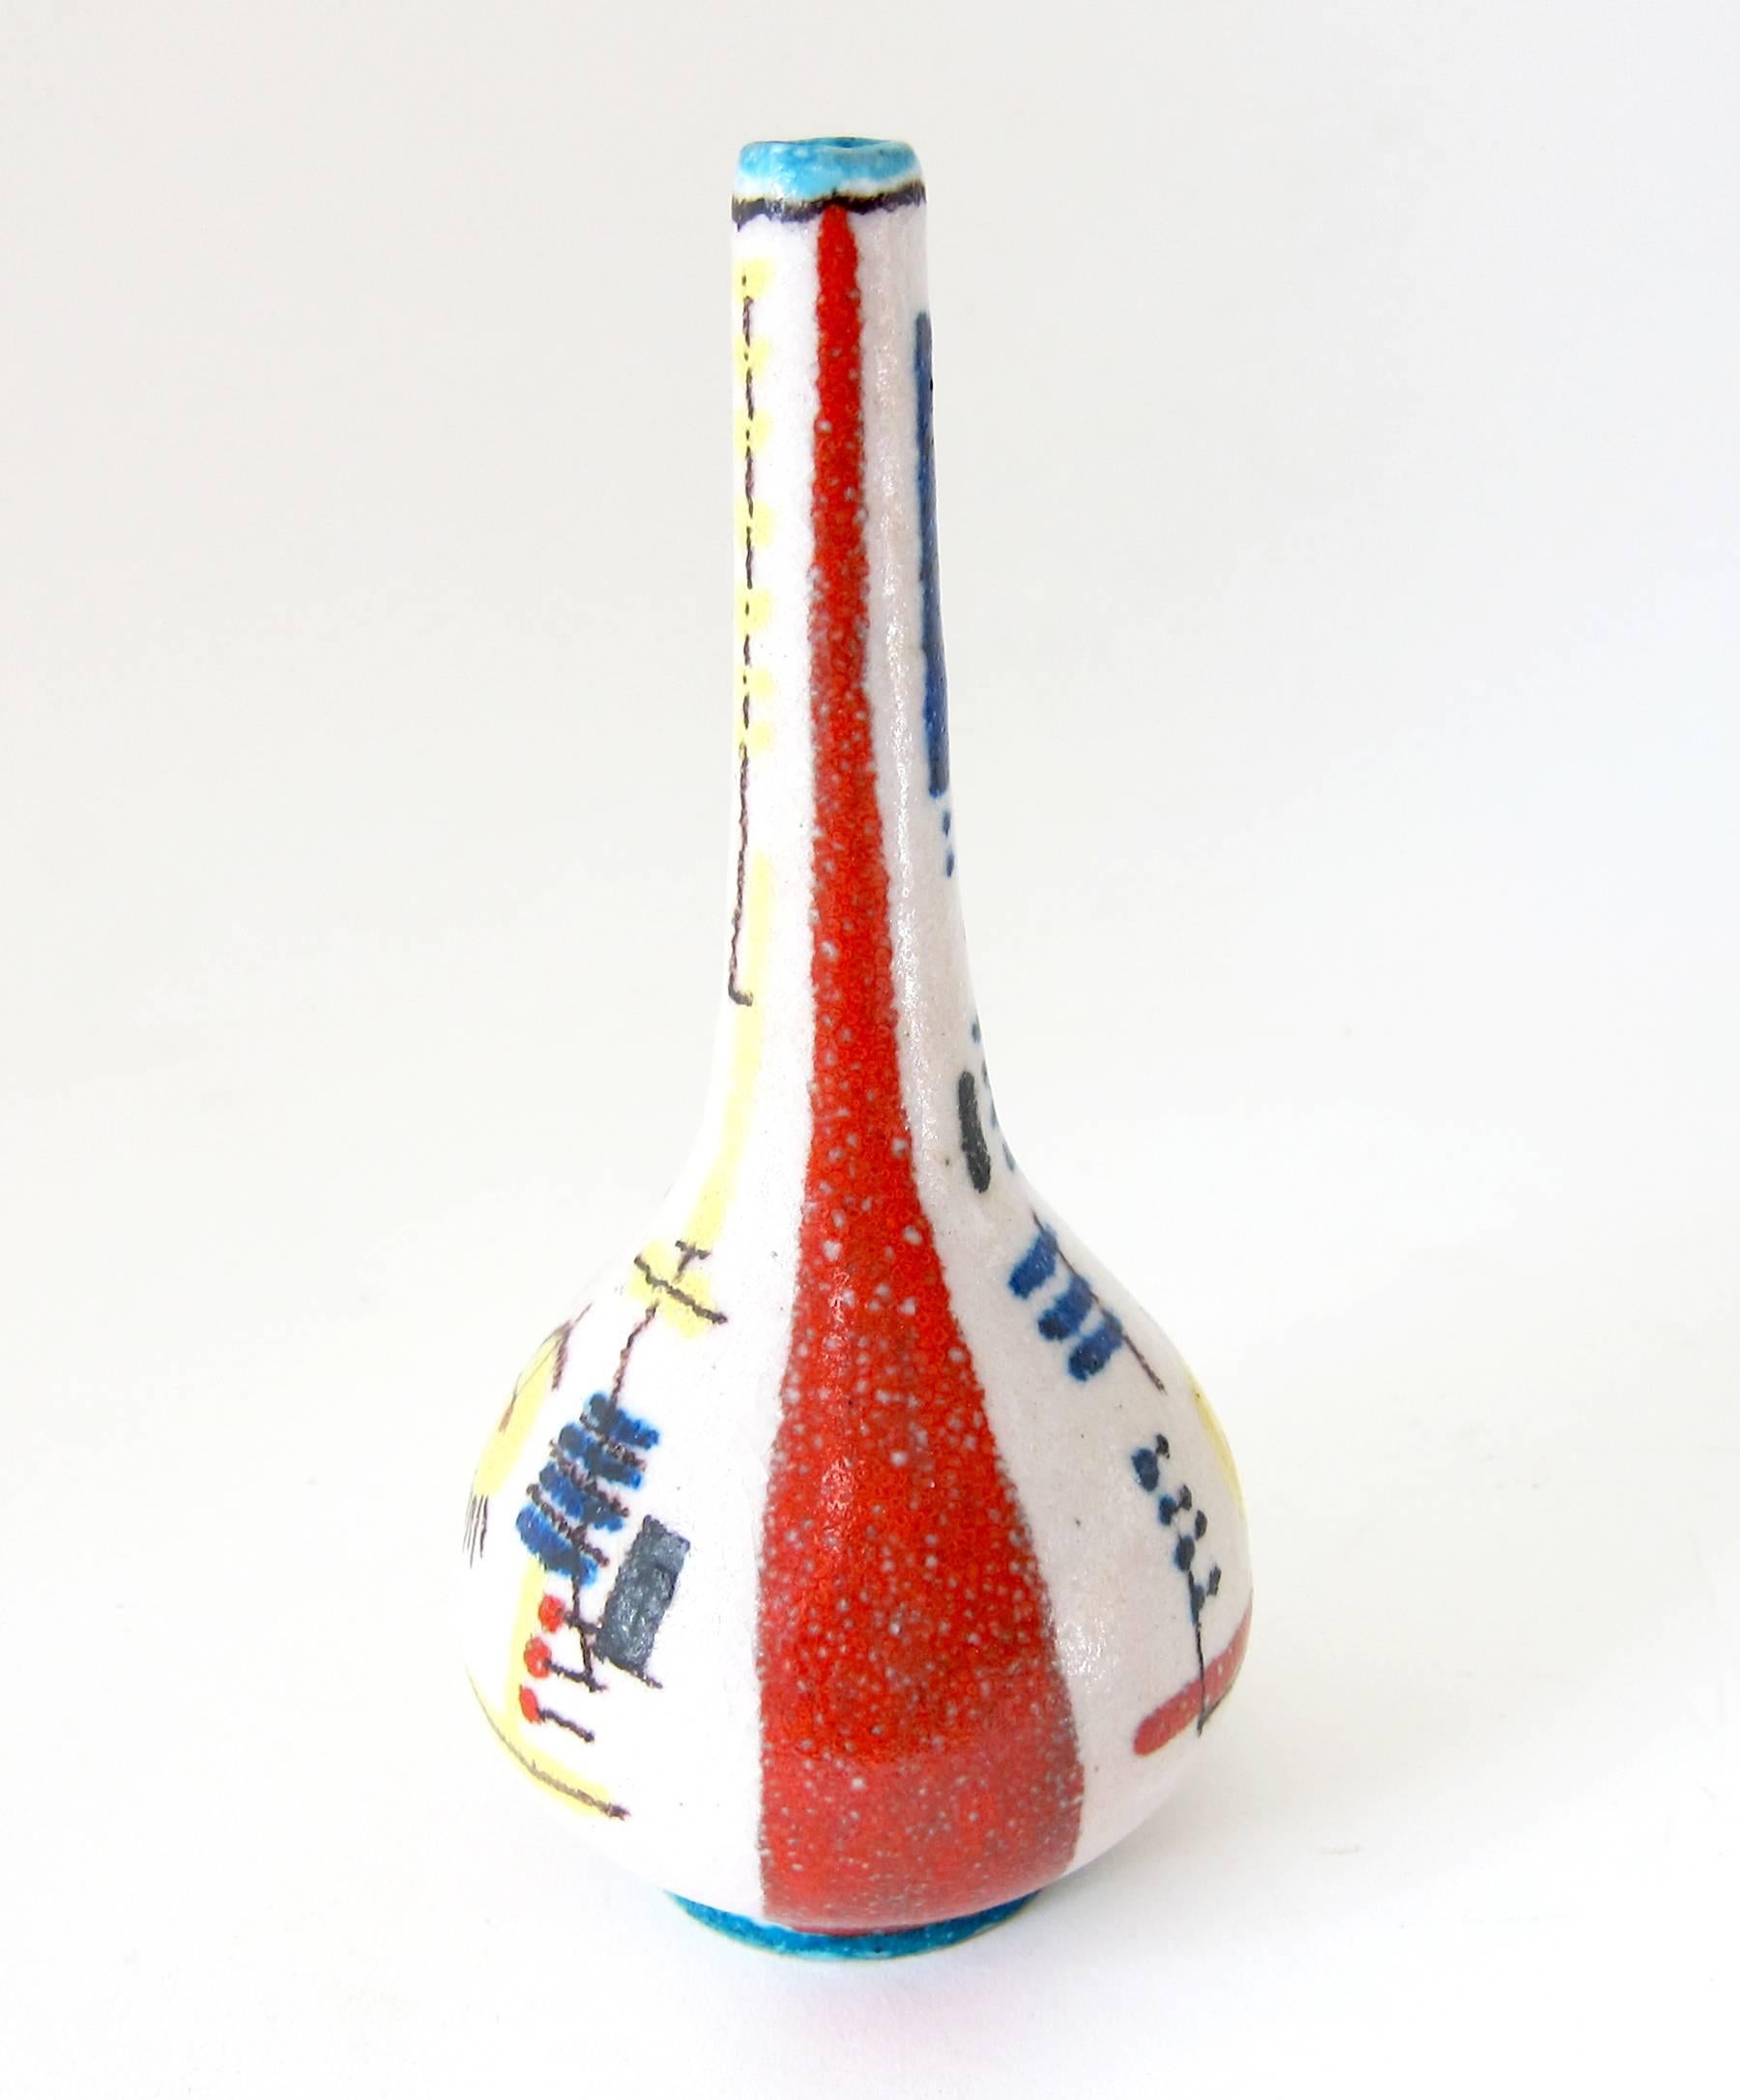 Italian modernist bud vase with foamy glaze and abstract design created by Guido Gambone of Florence, Italy.  Vase measures 6